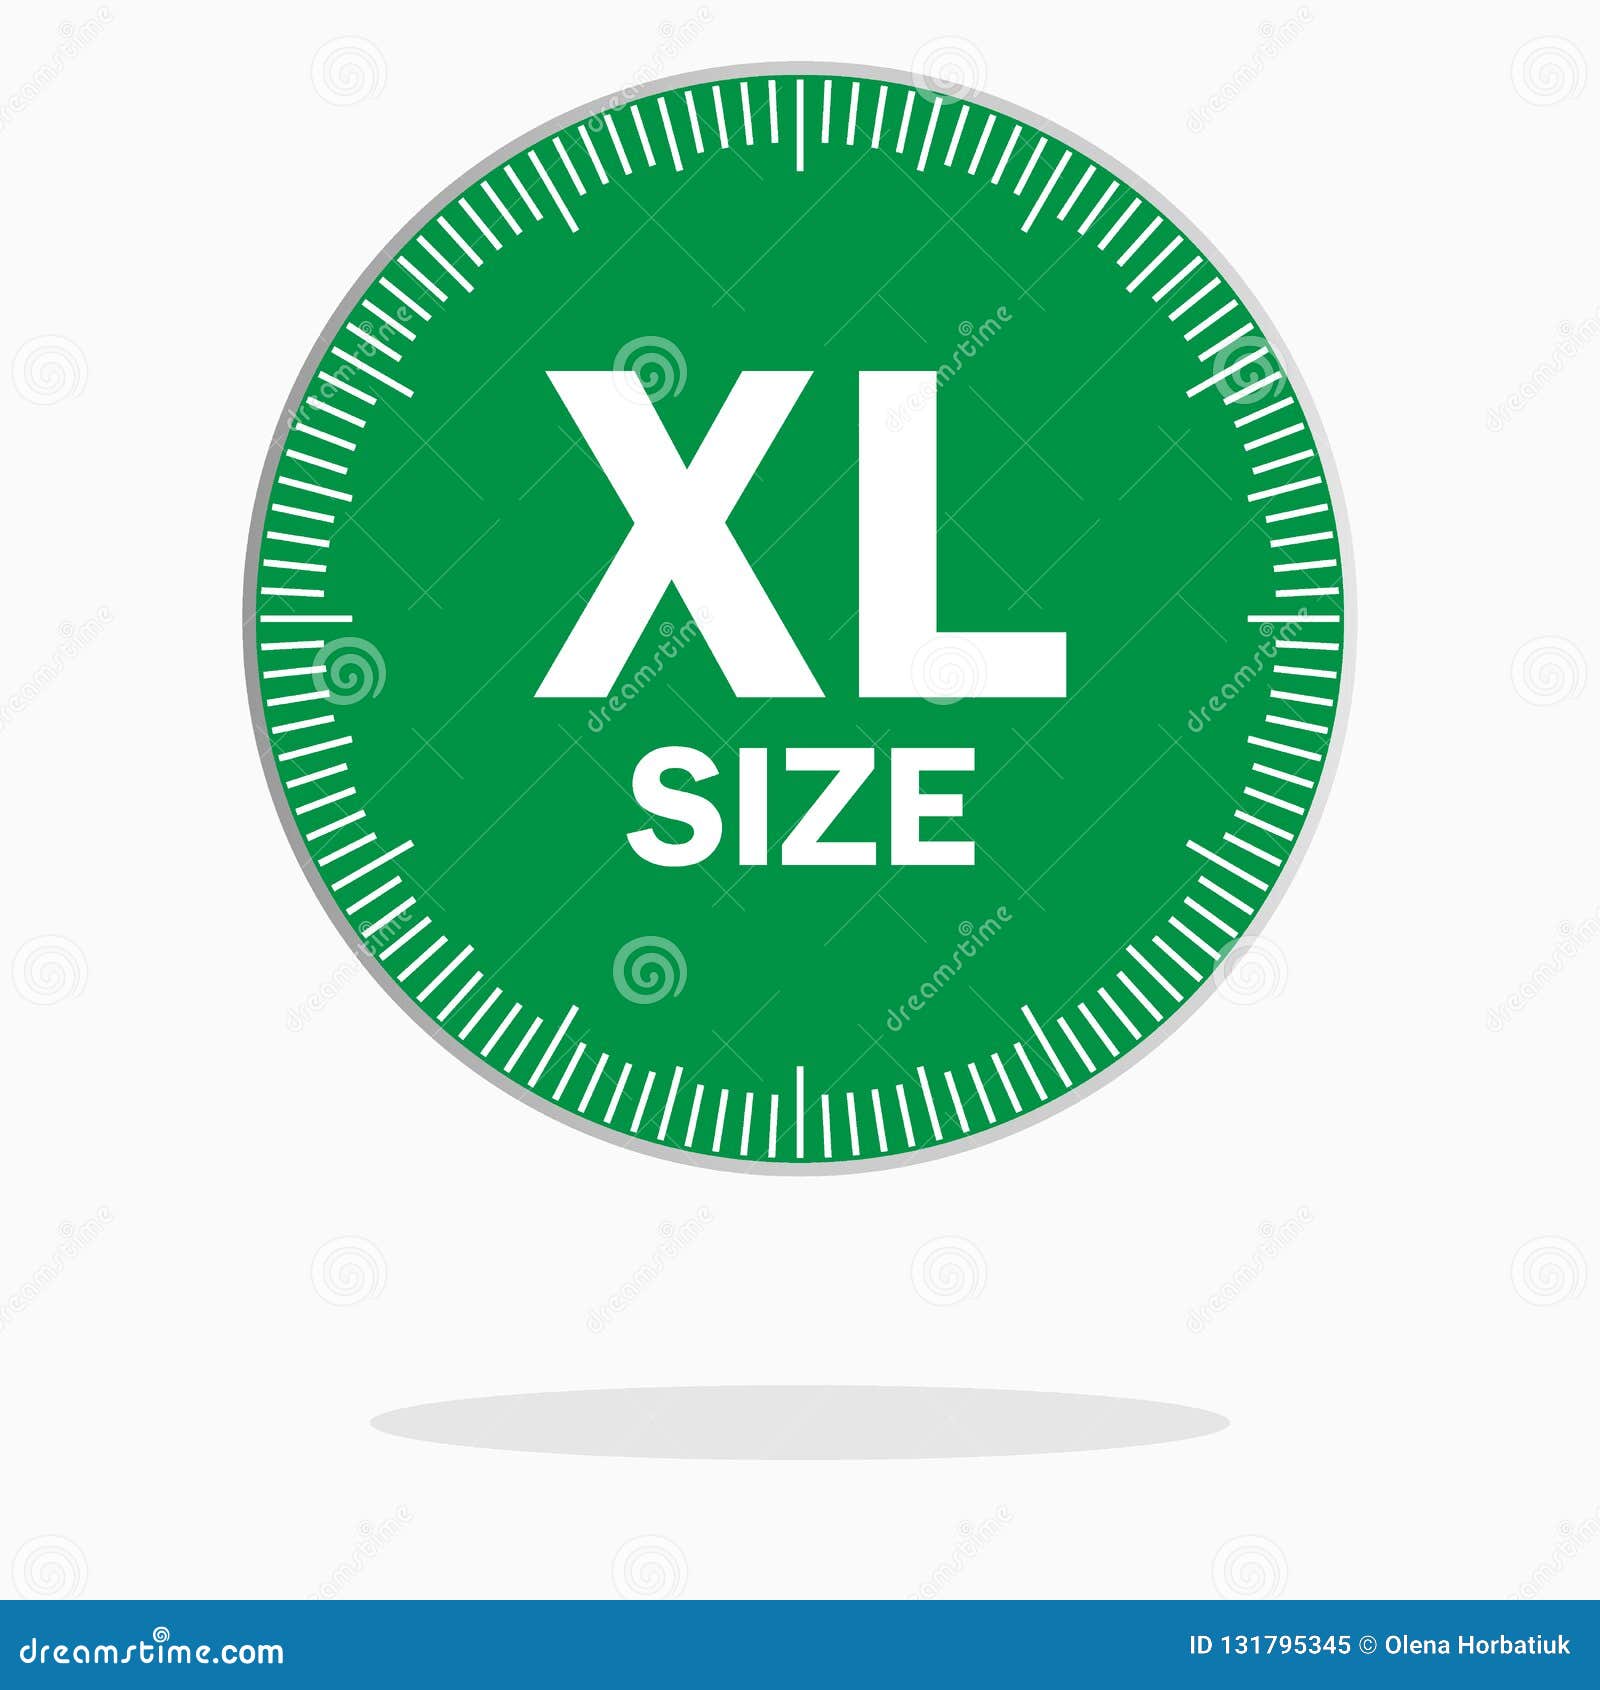 XL Size Clothing Label - Vector Illustration Stock Vector